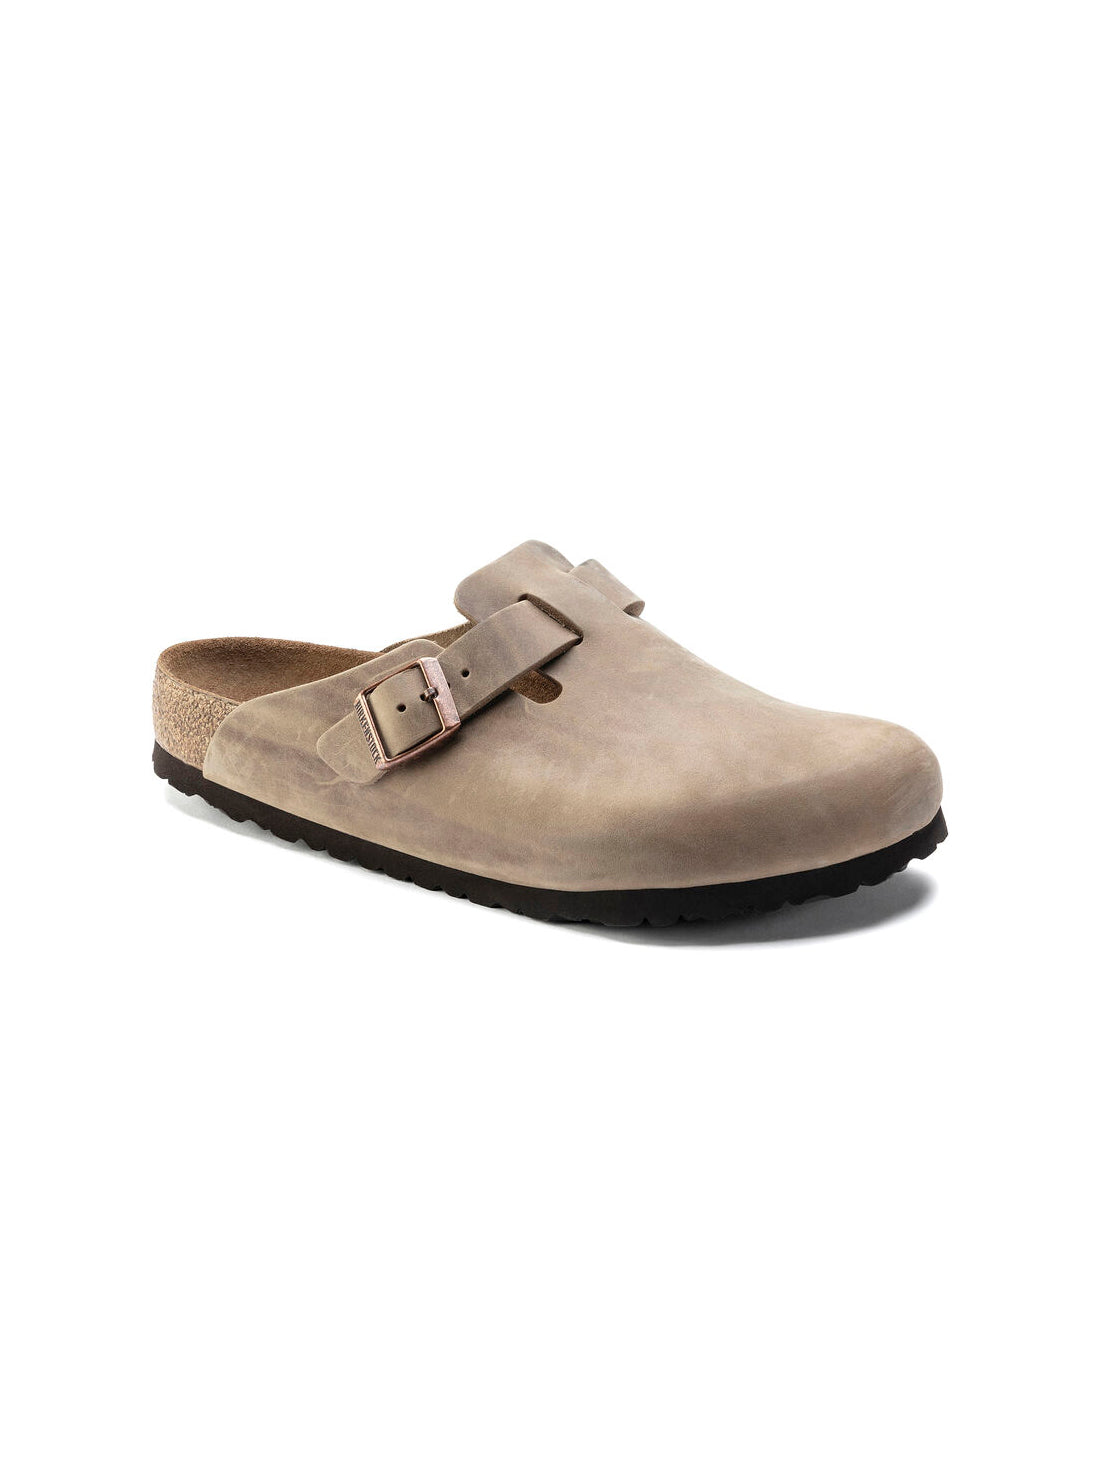 birkenstock boston clog soft footbed oiled leather in tobacco